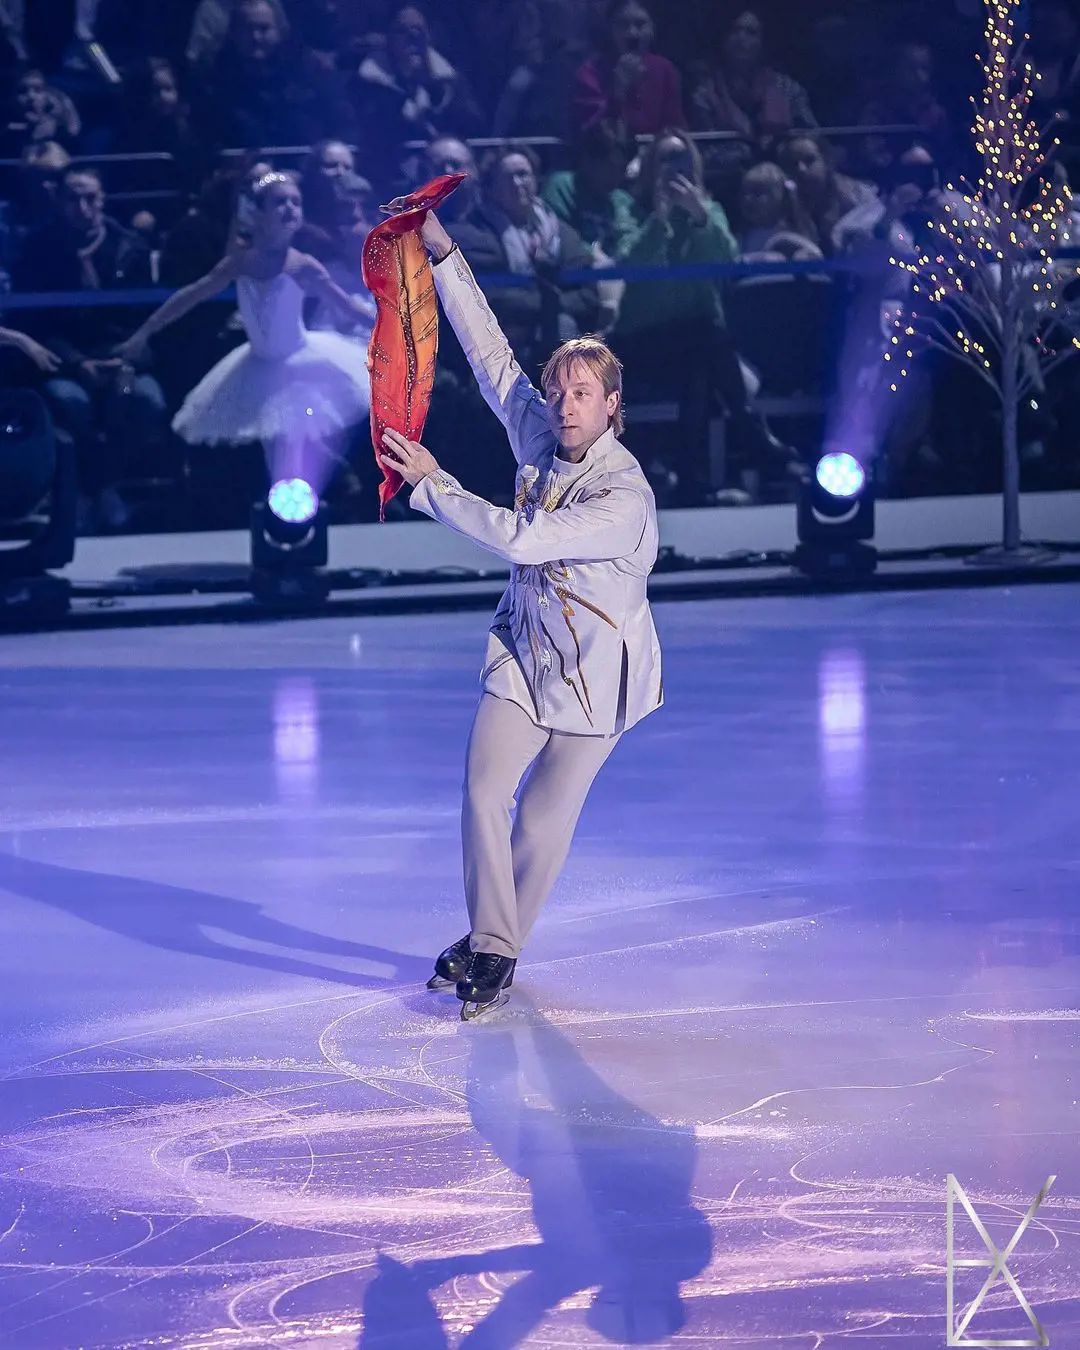 Evgeni Performing At The VTB Arena Dynamo On 25 January 2023